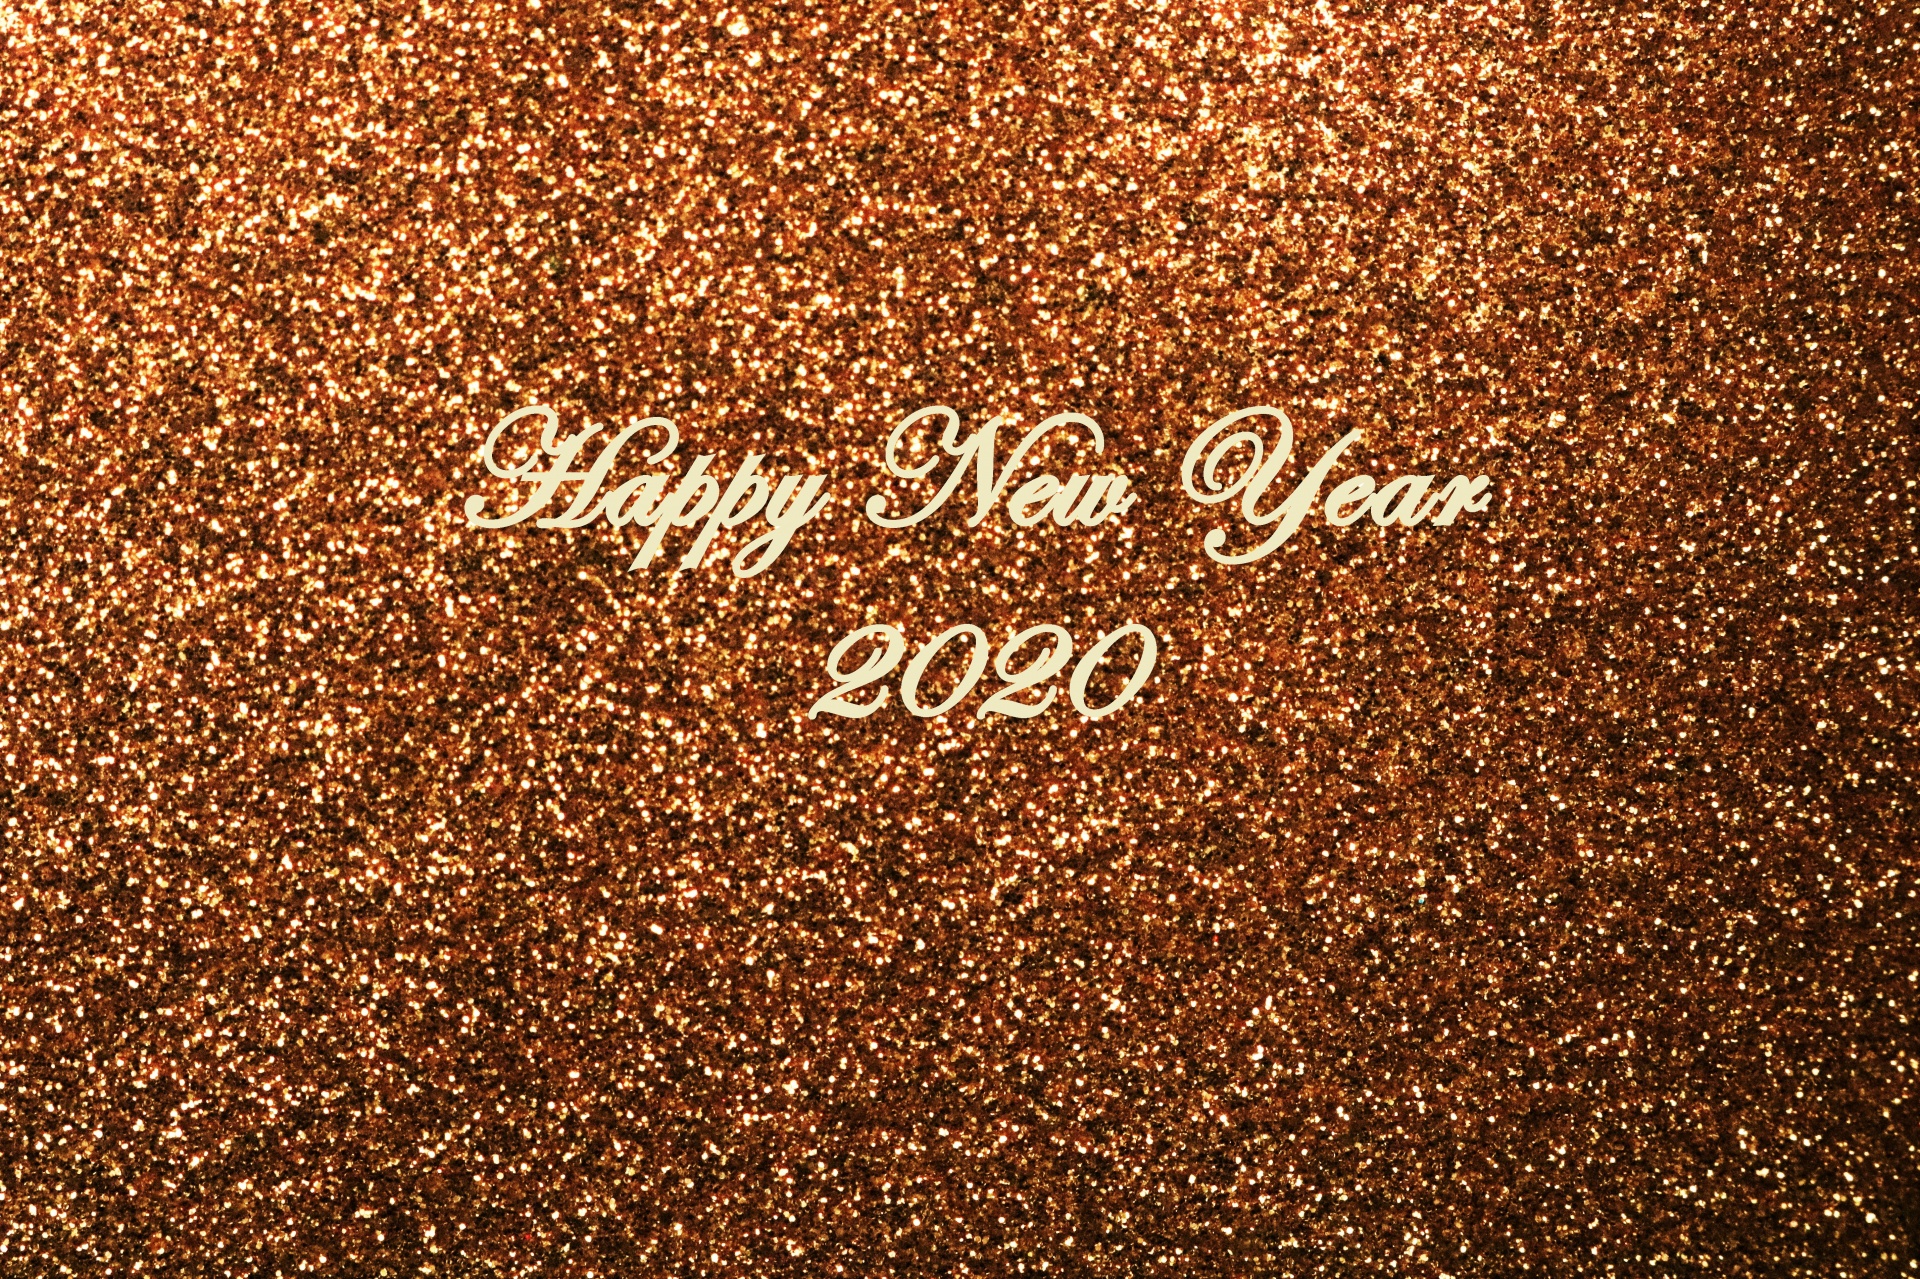 Sparkling gold glitter background with the text, Happy New Year 2020.